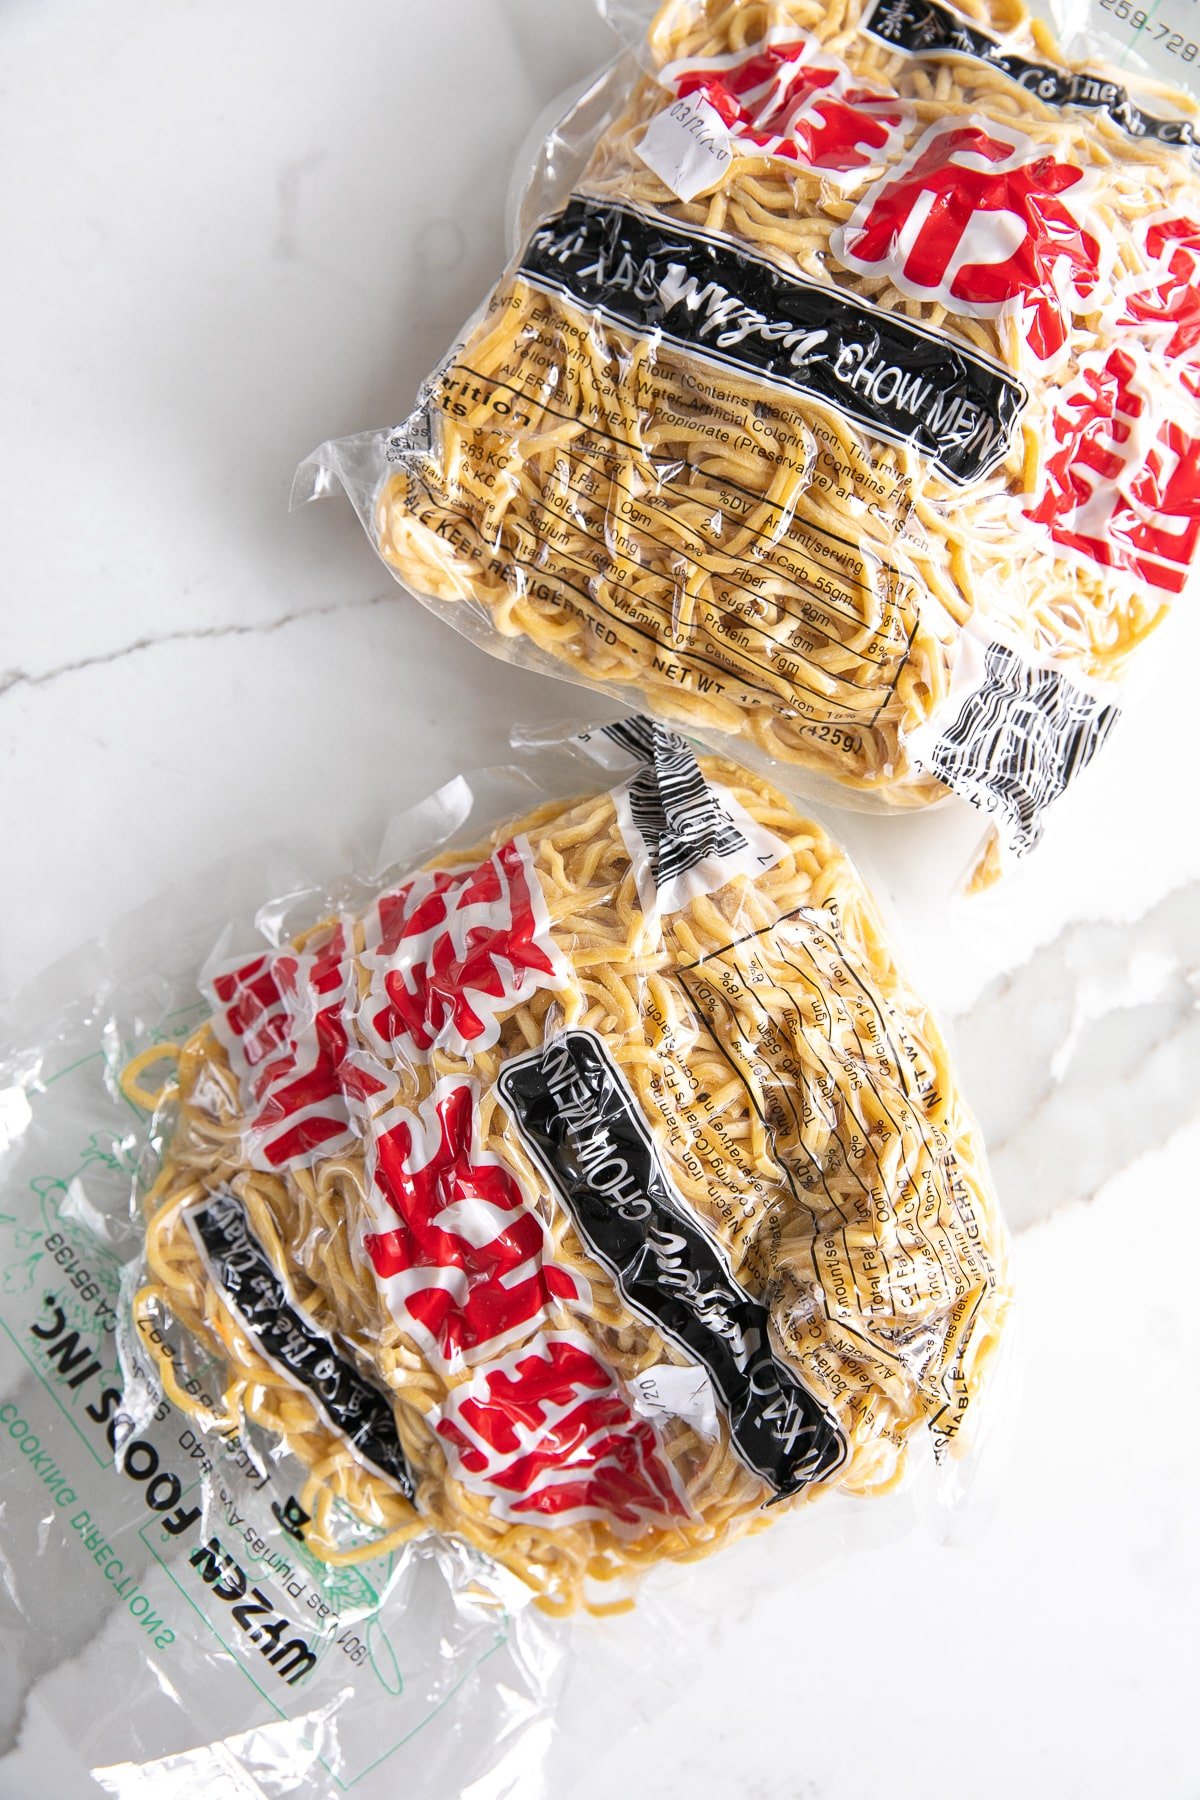 Packaged chow mein noodles.